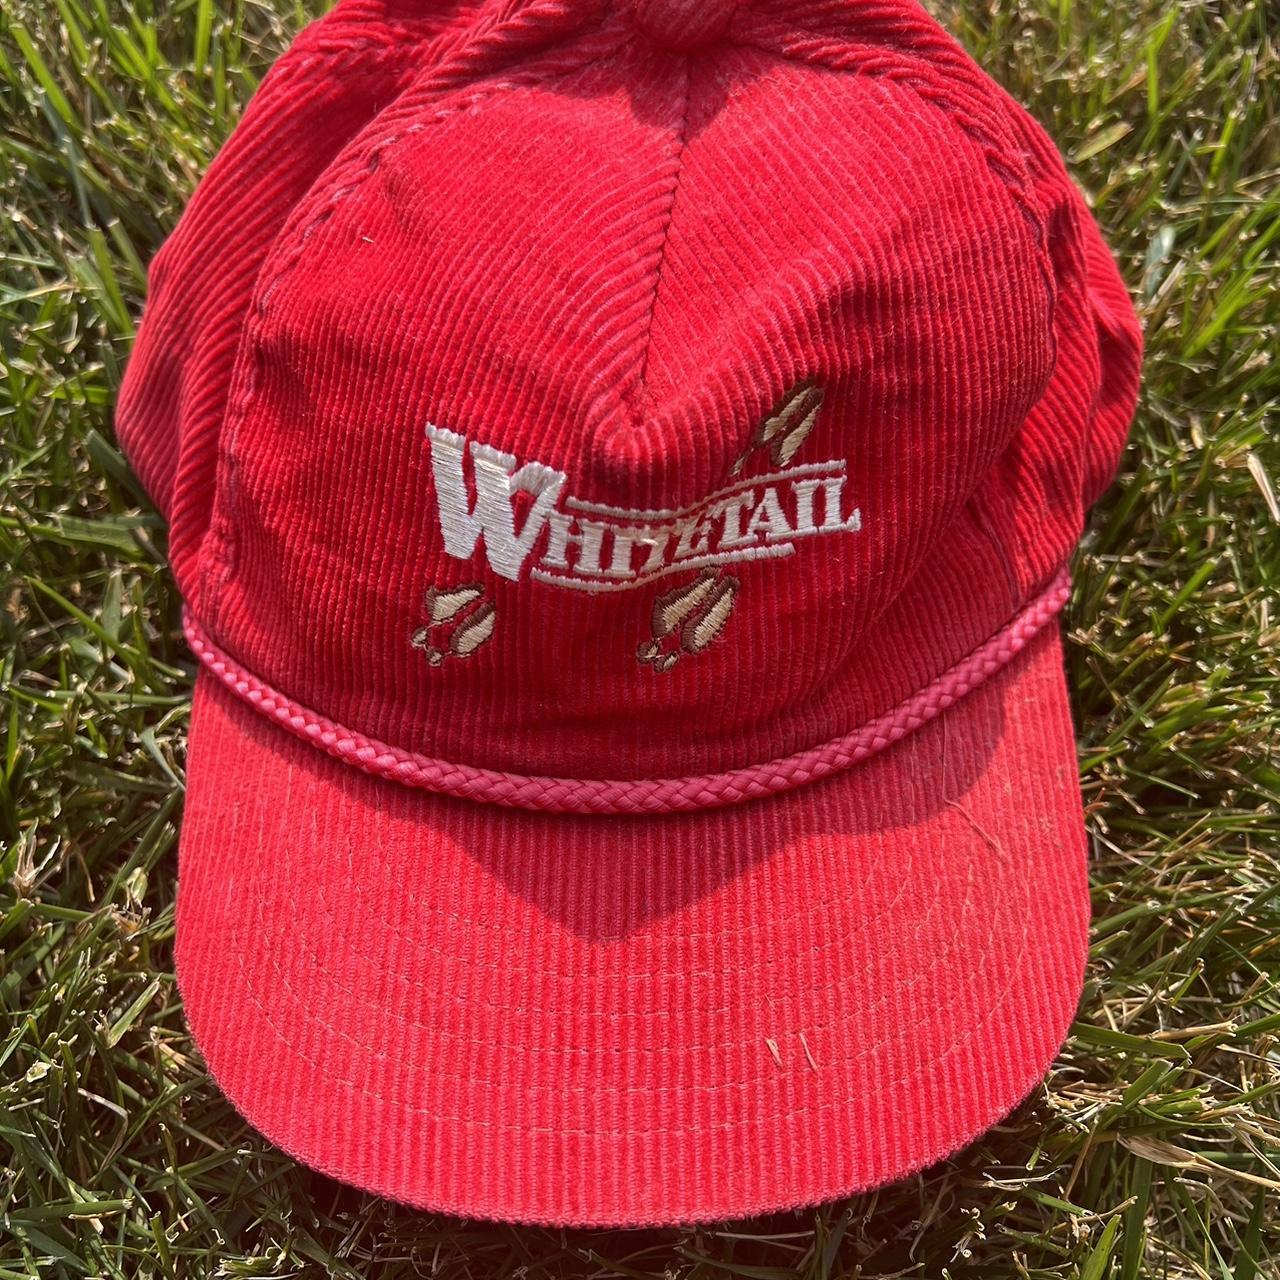 Men's White and Red Hat